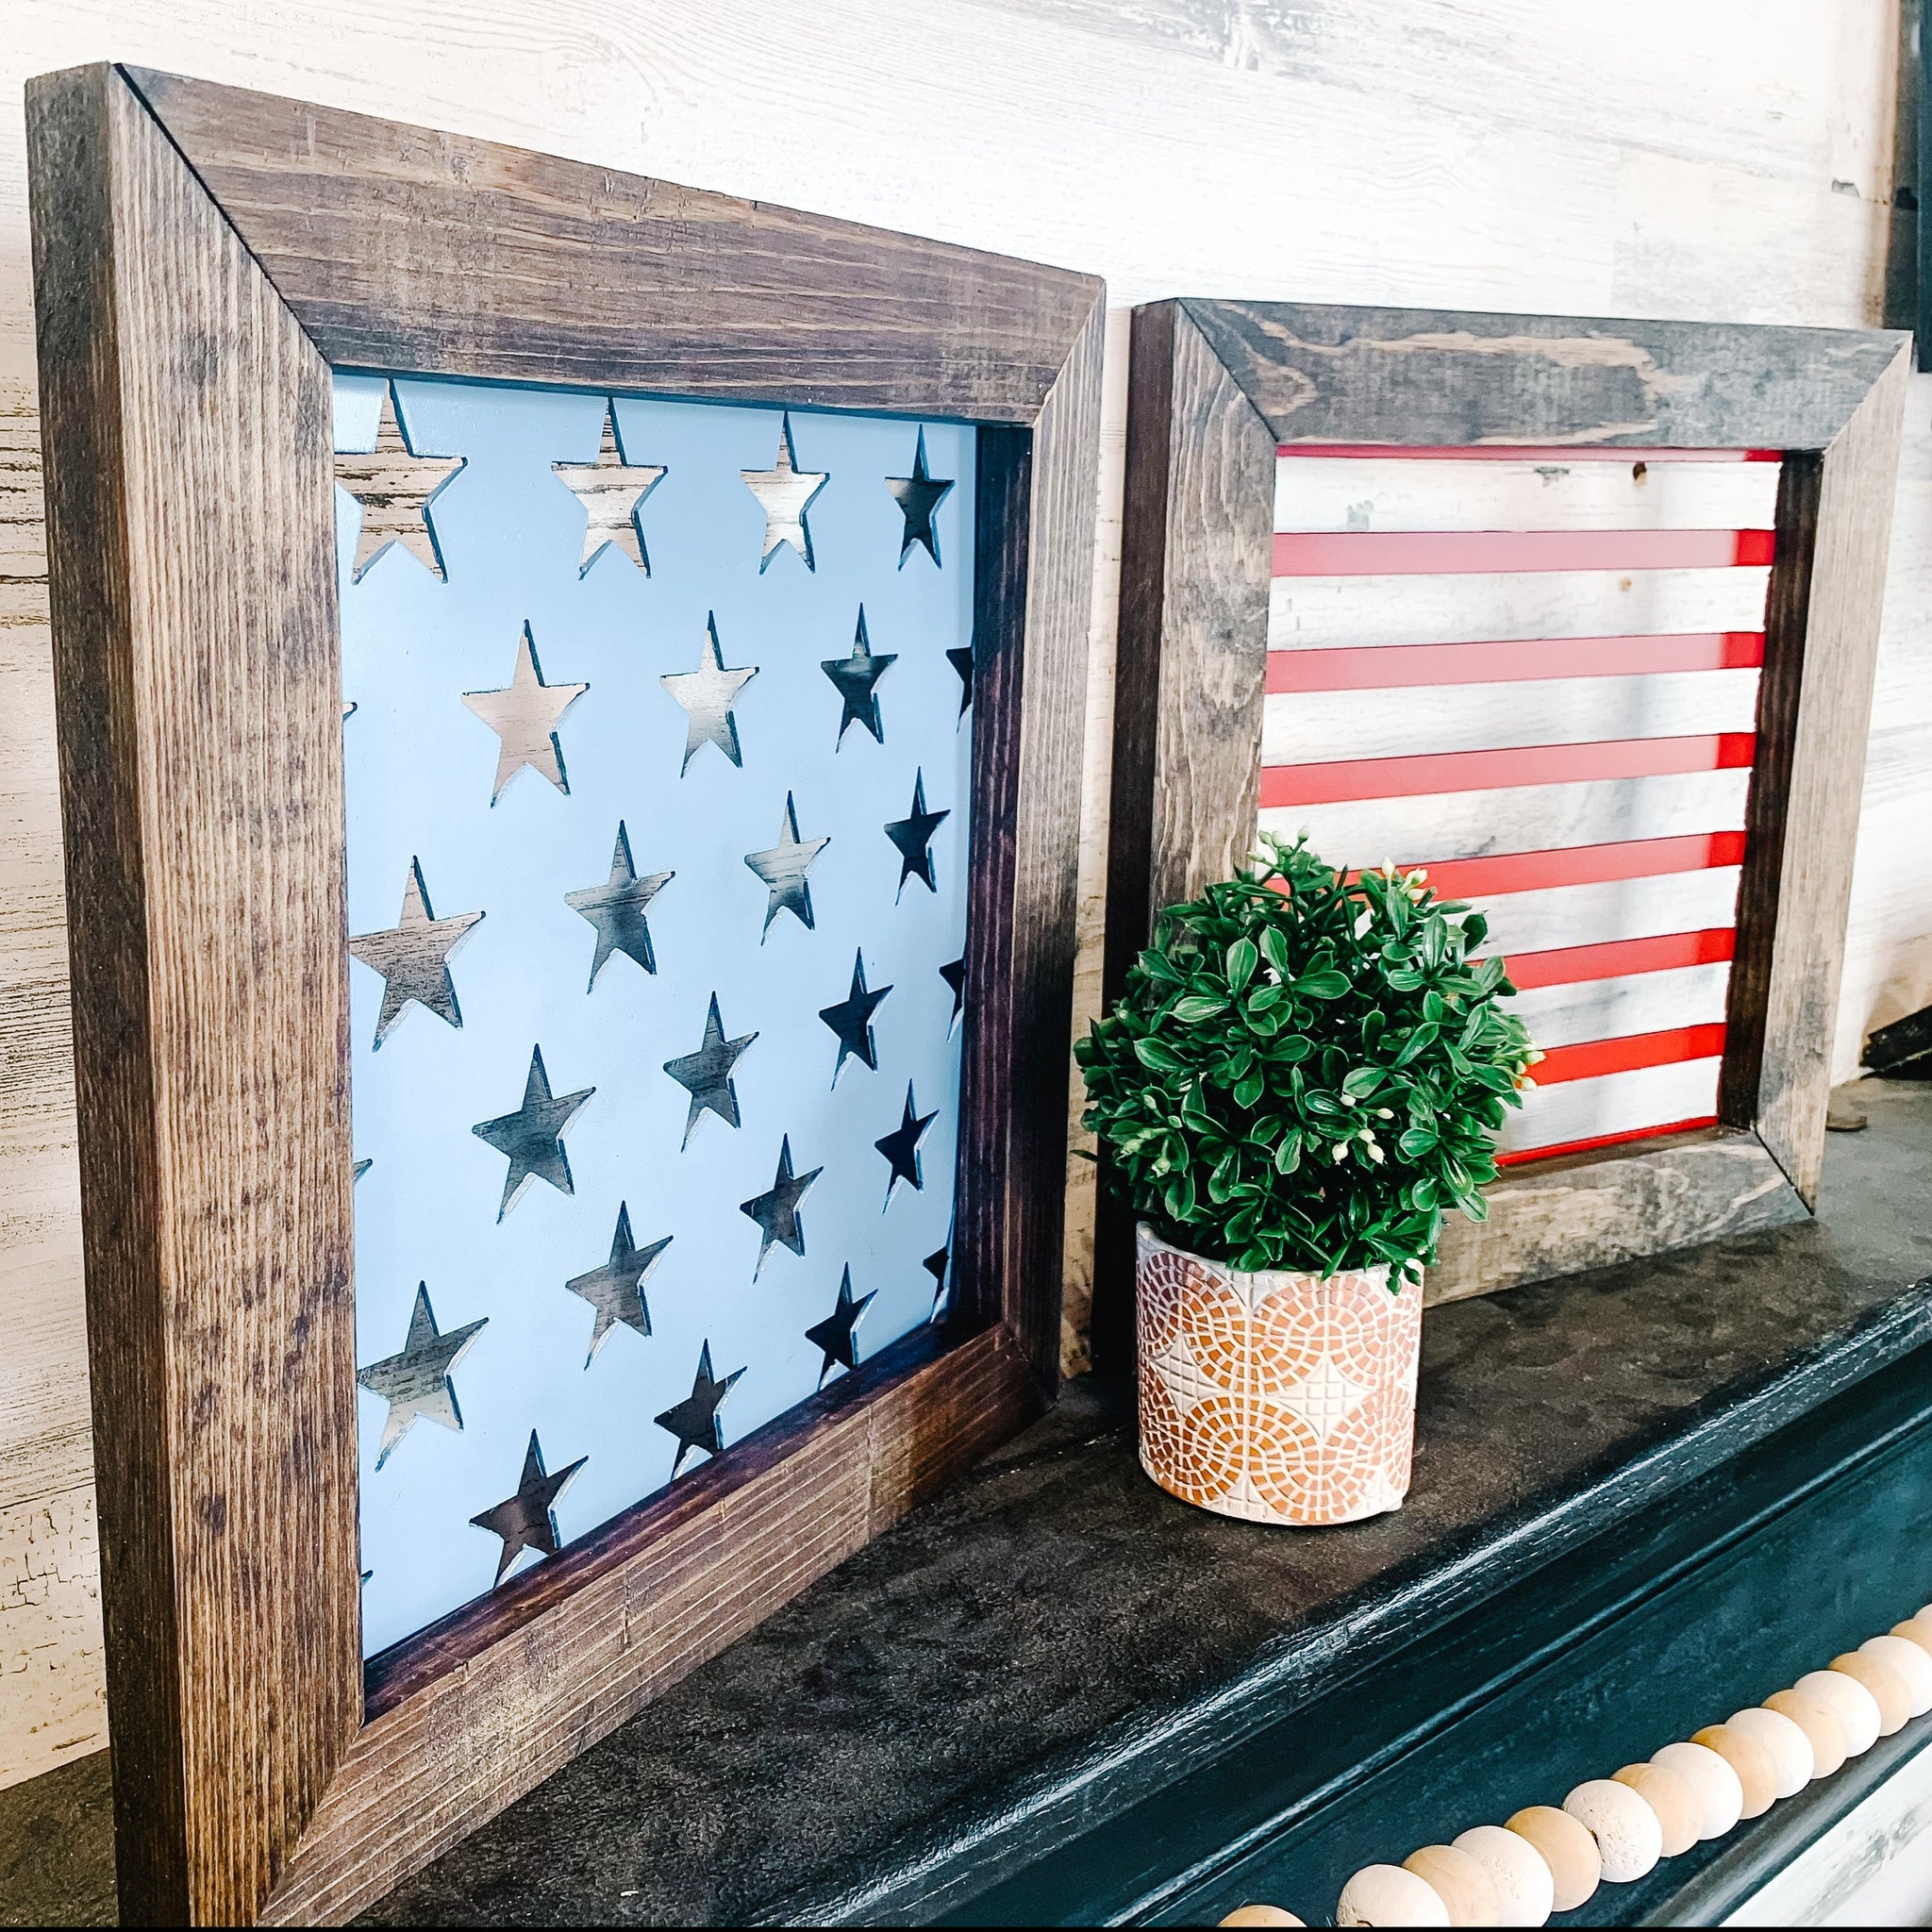 Framed Stars and Stripes Signs